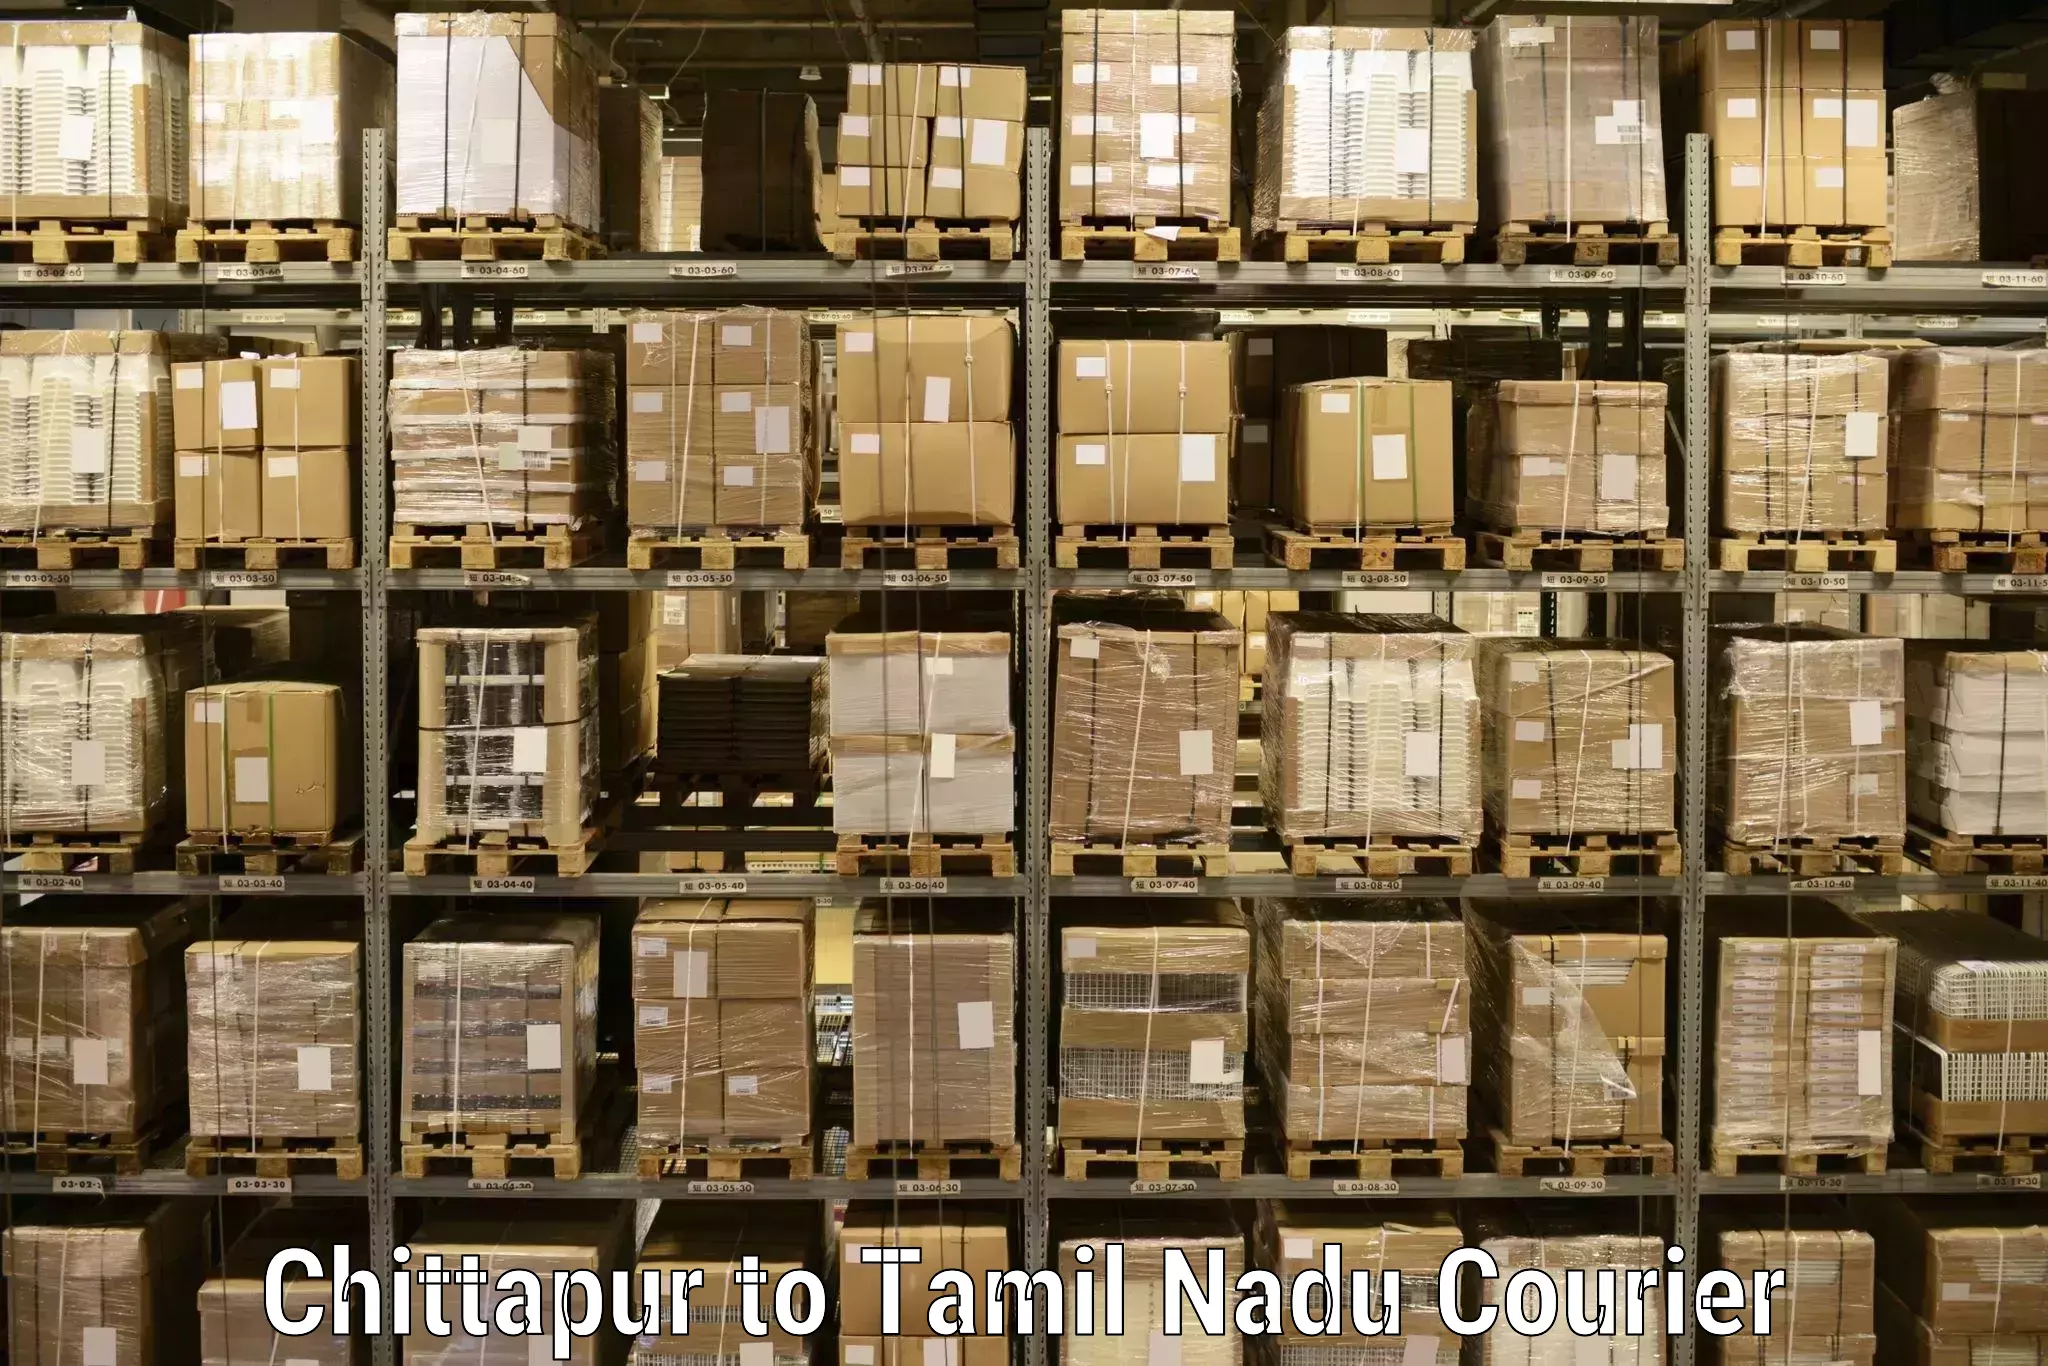 Next-day delivery options Chittapur to Avadi